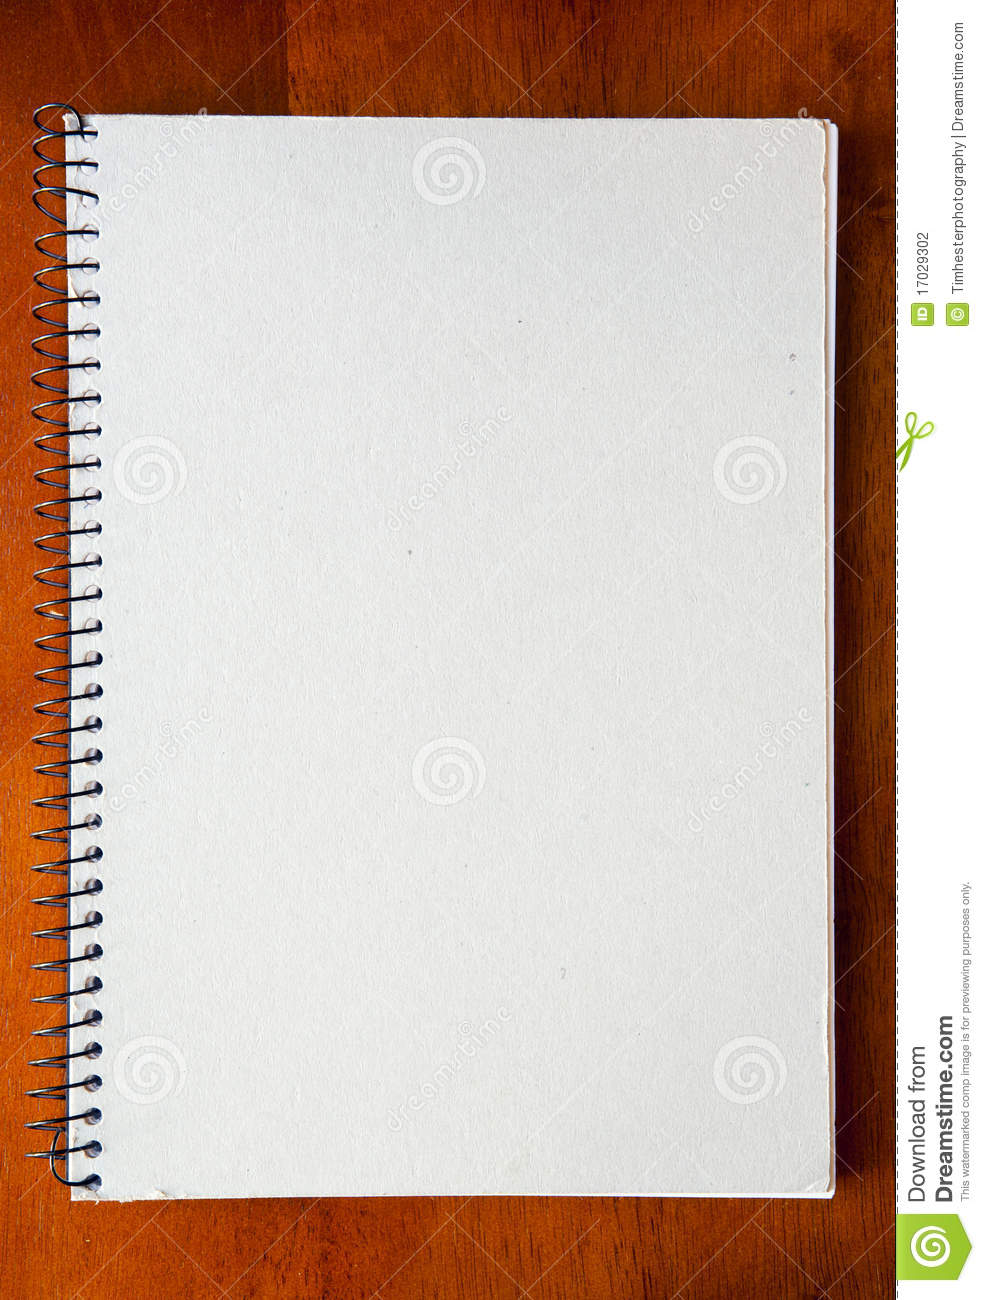 Go Back   Images For   Spiral Notepad Clipart